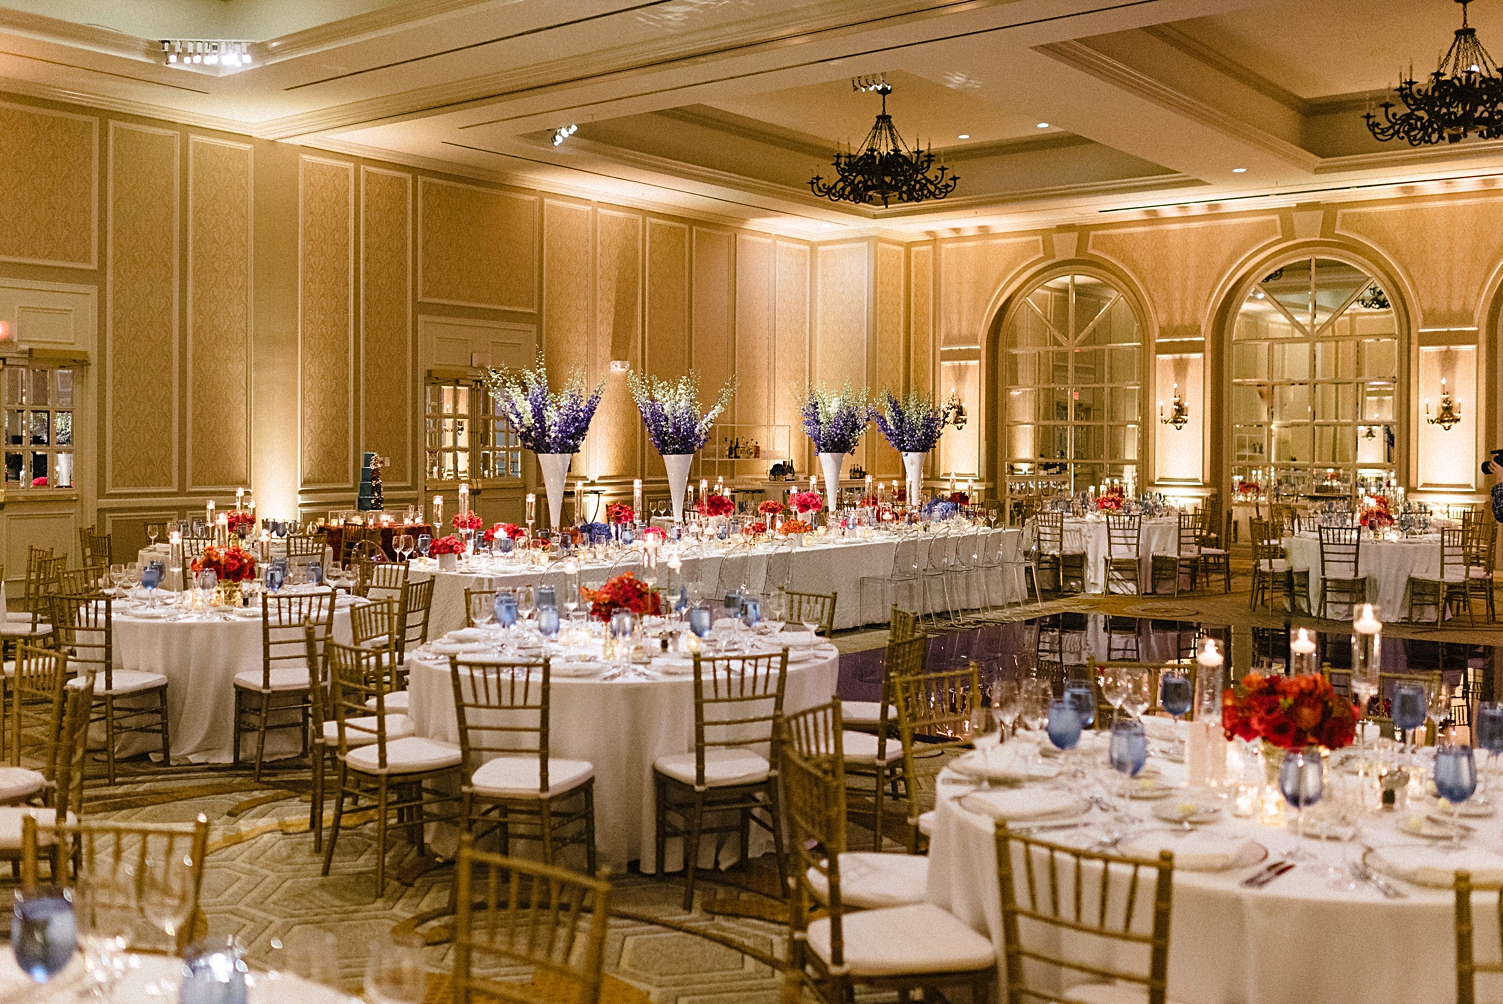 adolphus hotel wedding reception tables blue and red flowers